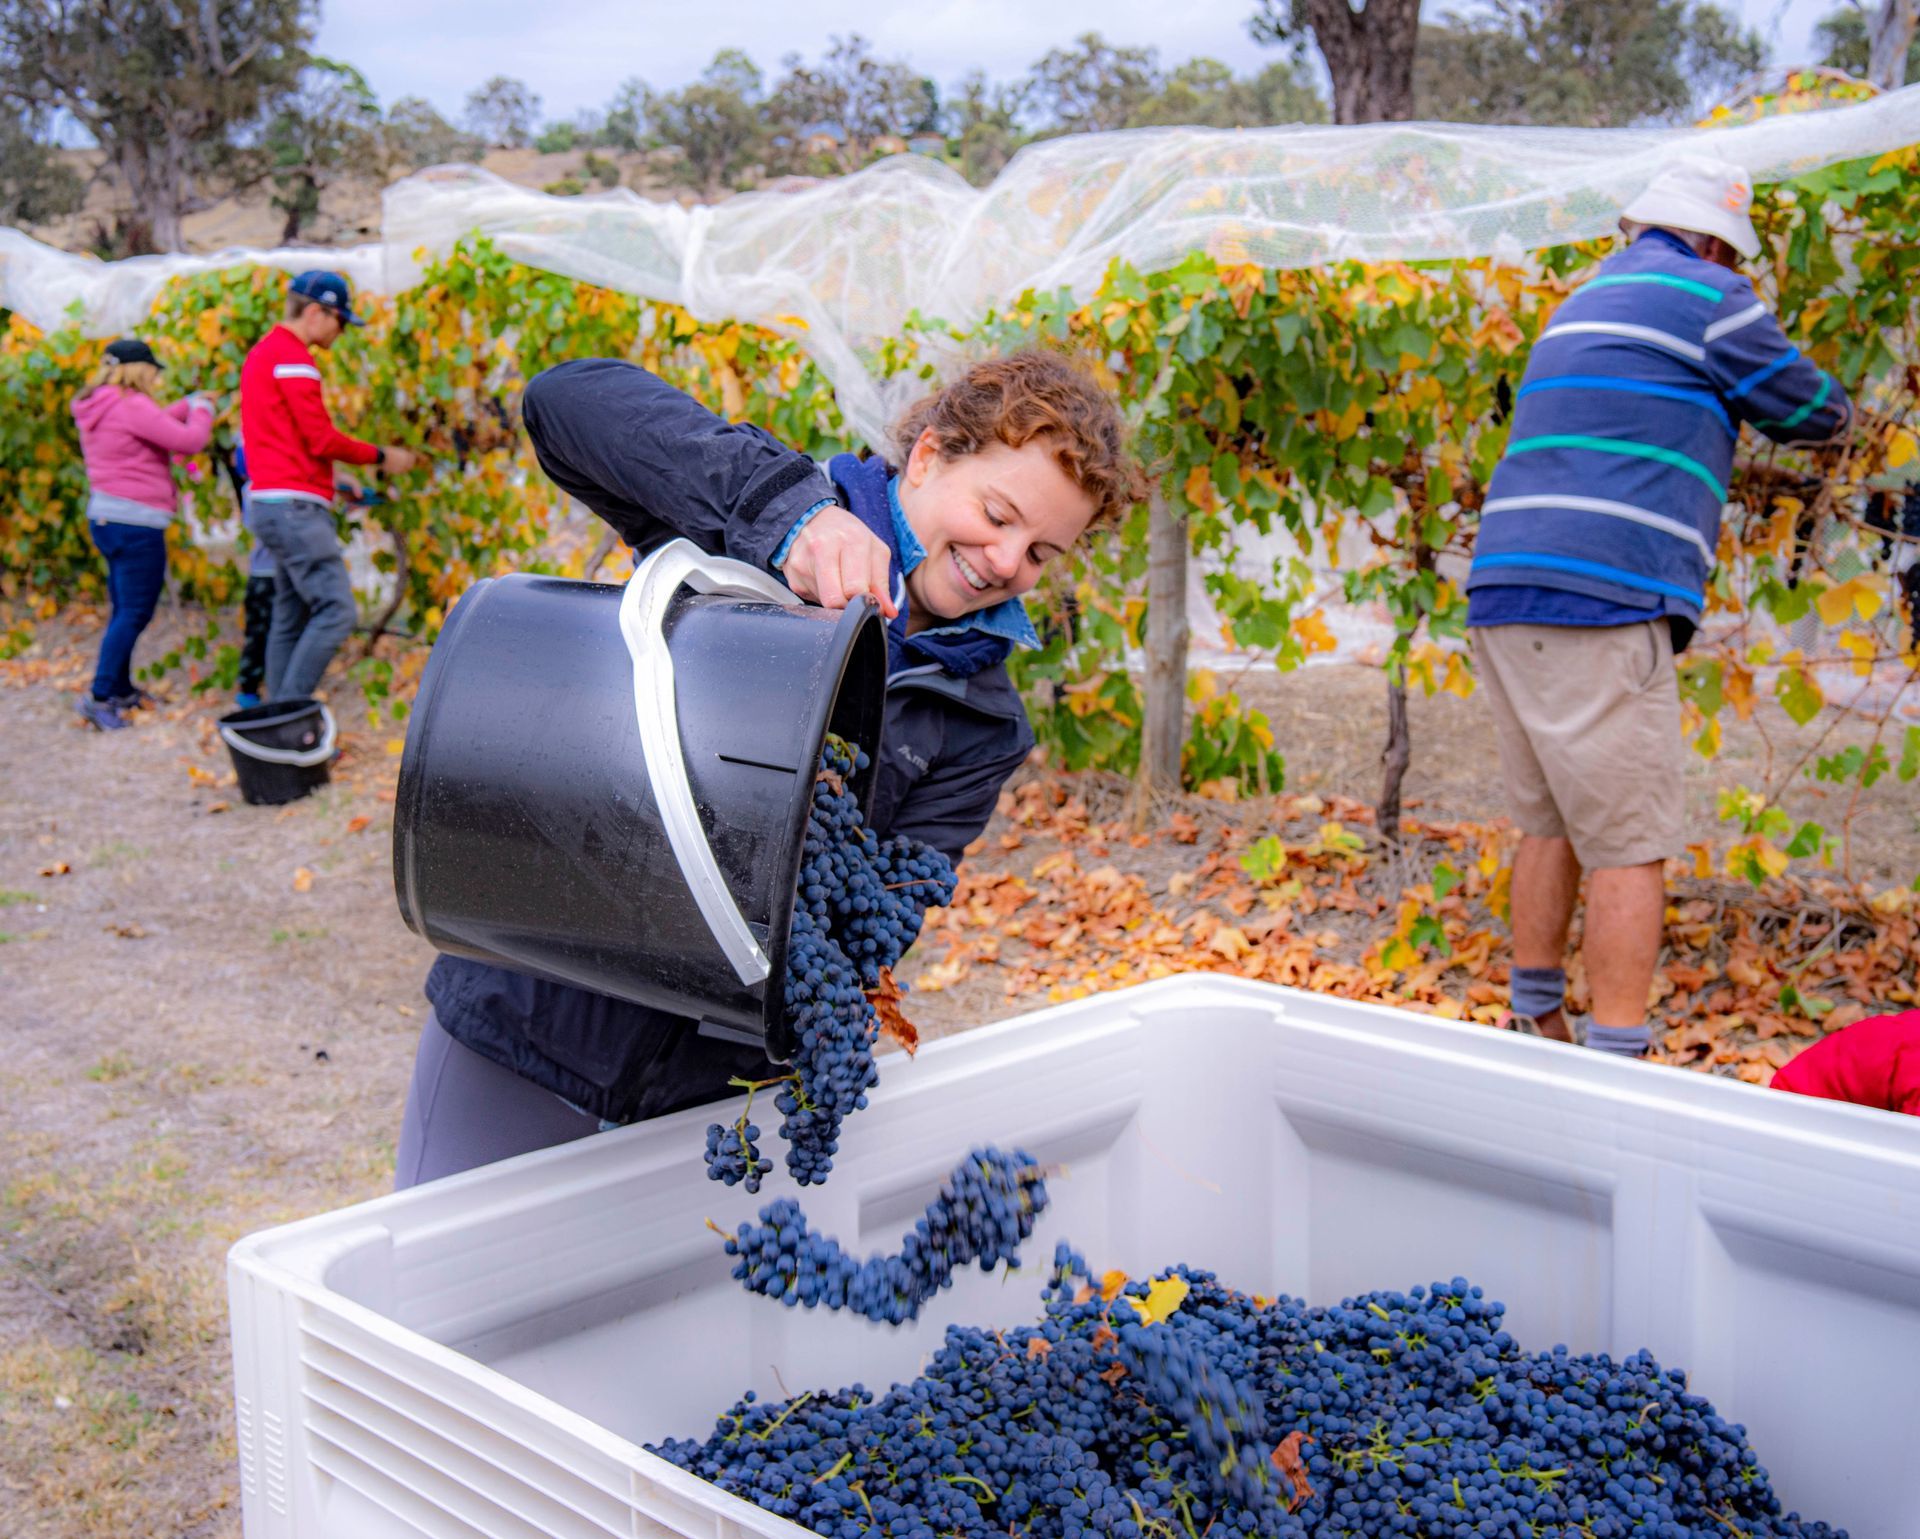 Our family hand-picking the grapes